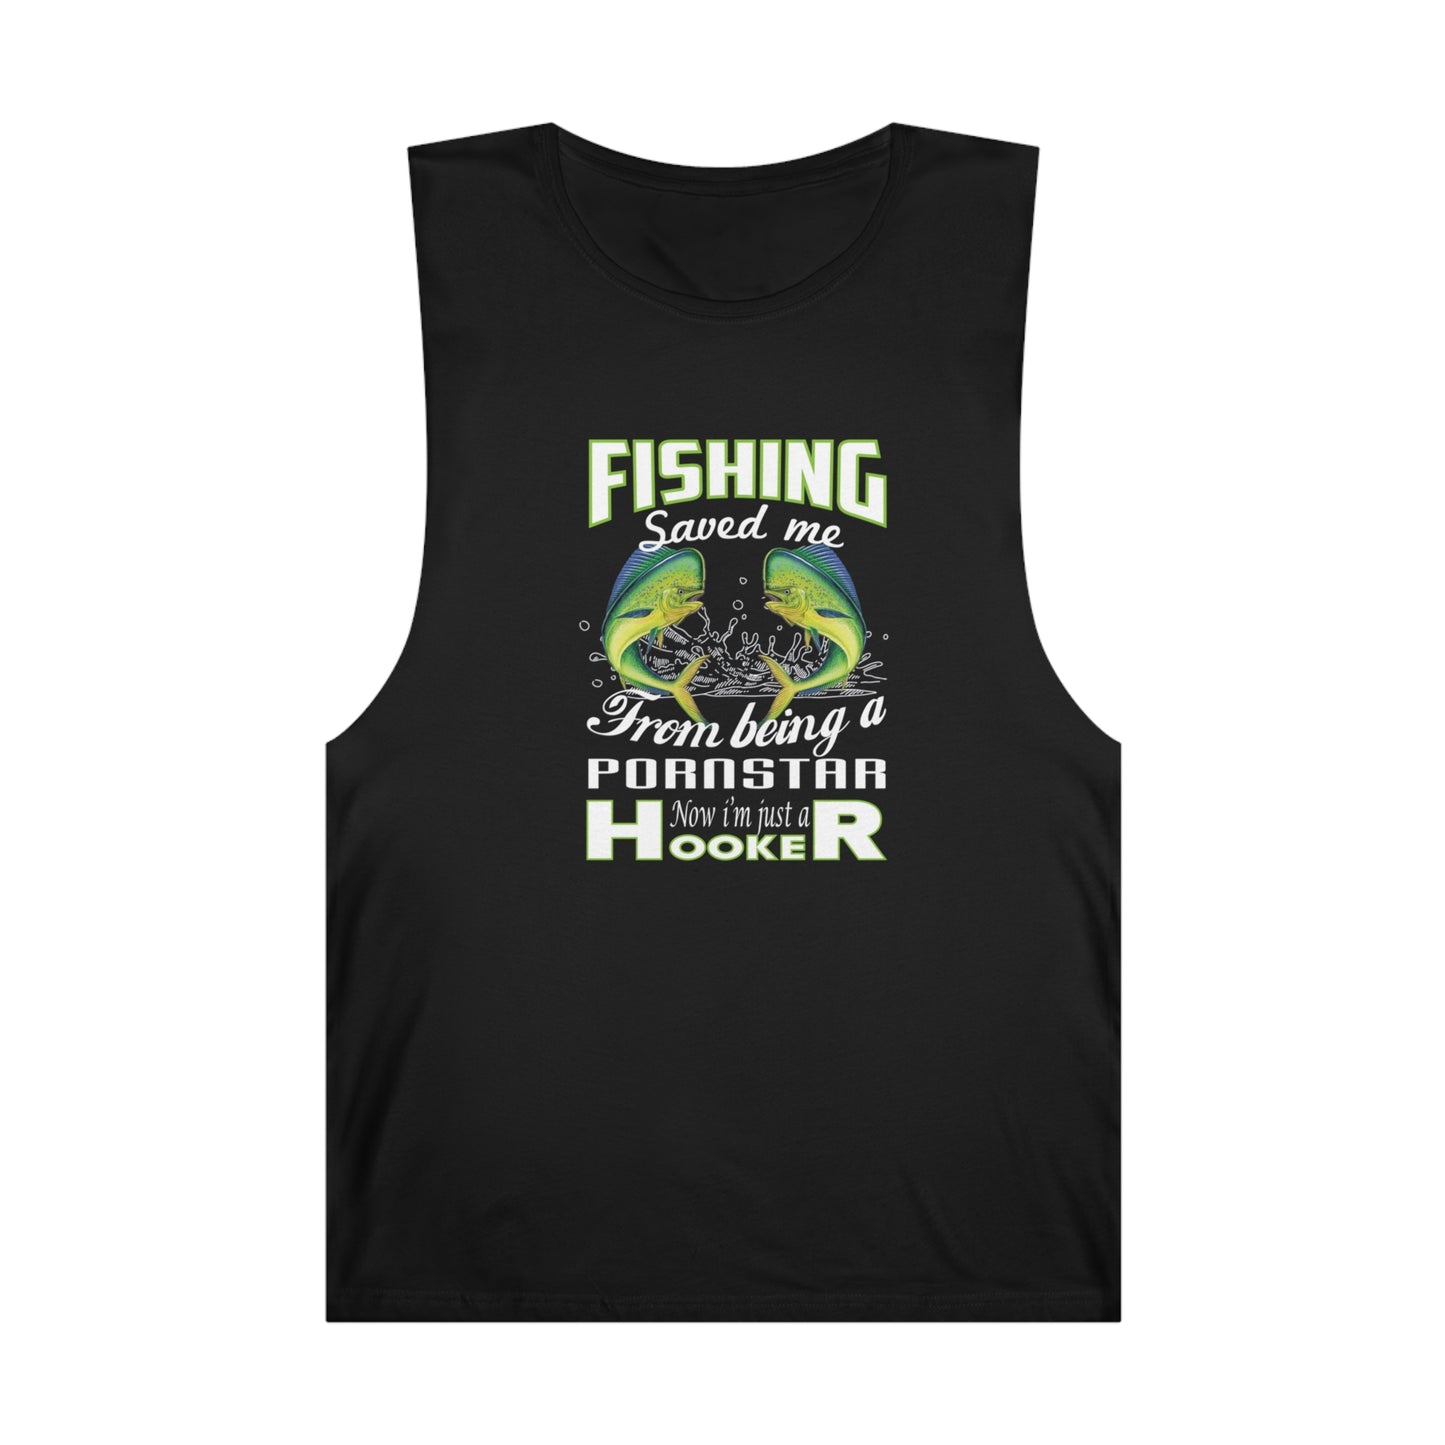 Unisex Barnard Tank - Fishing Saved Me From Being A Pornstar Now I'm Just A Hooker